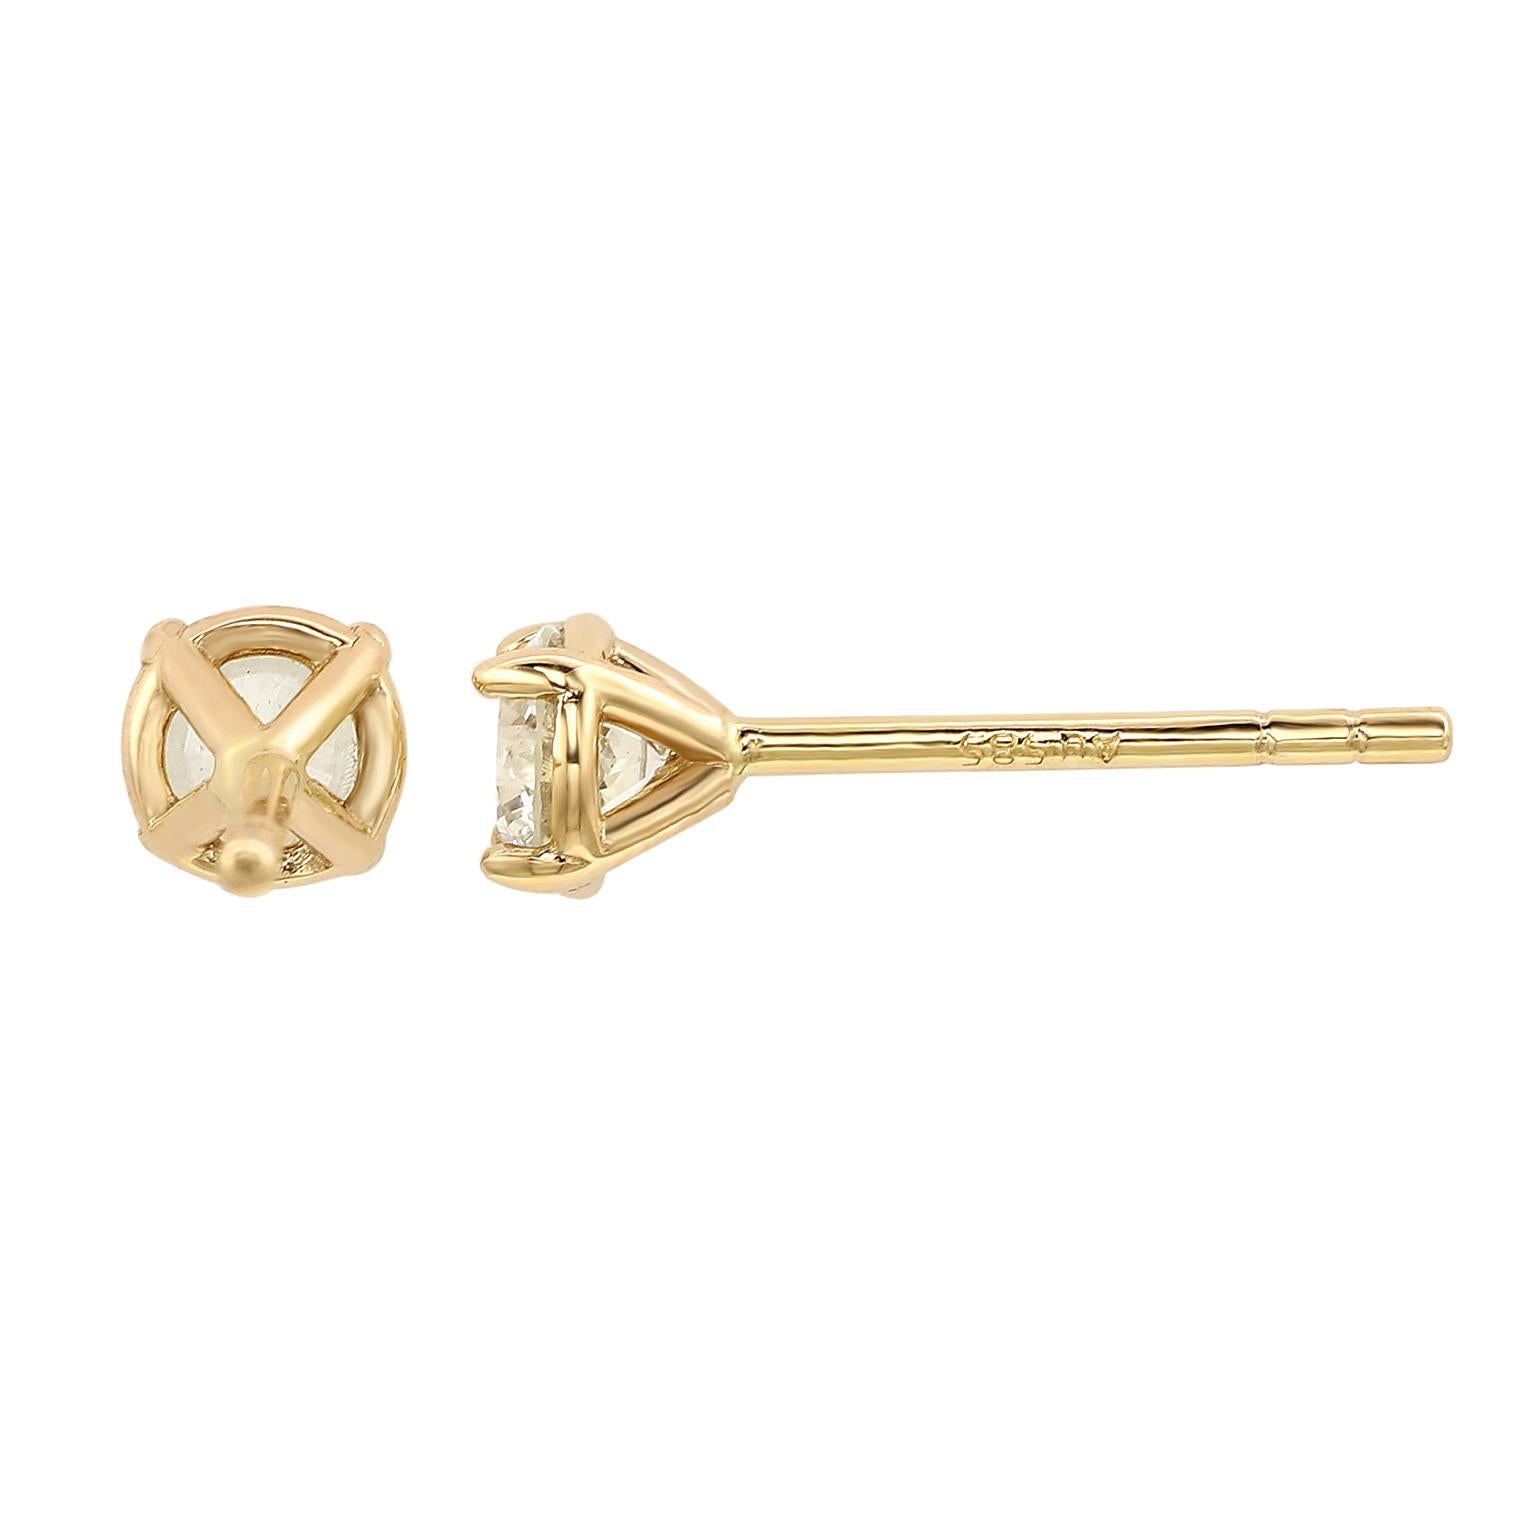 Add an elegant accent to your outfit with these sparkling stud earrings featuring two gorgeous white diamonds in a prong setting. Crafted in 14-karat yellow gold, these earrings have a high polish finish and butterfly clasp.

White Diamonds:
2